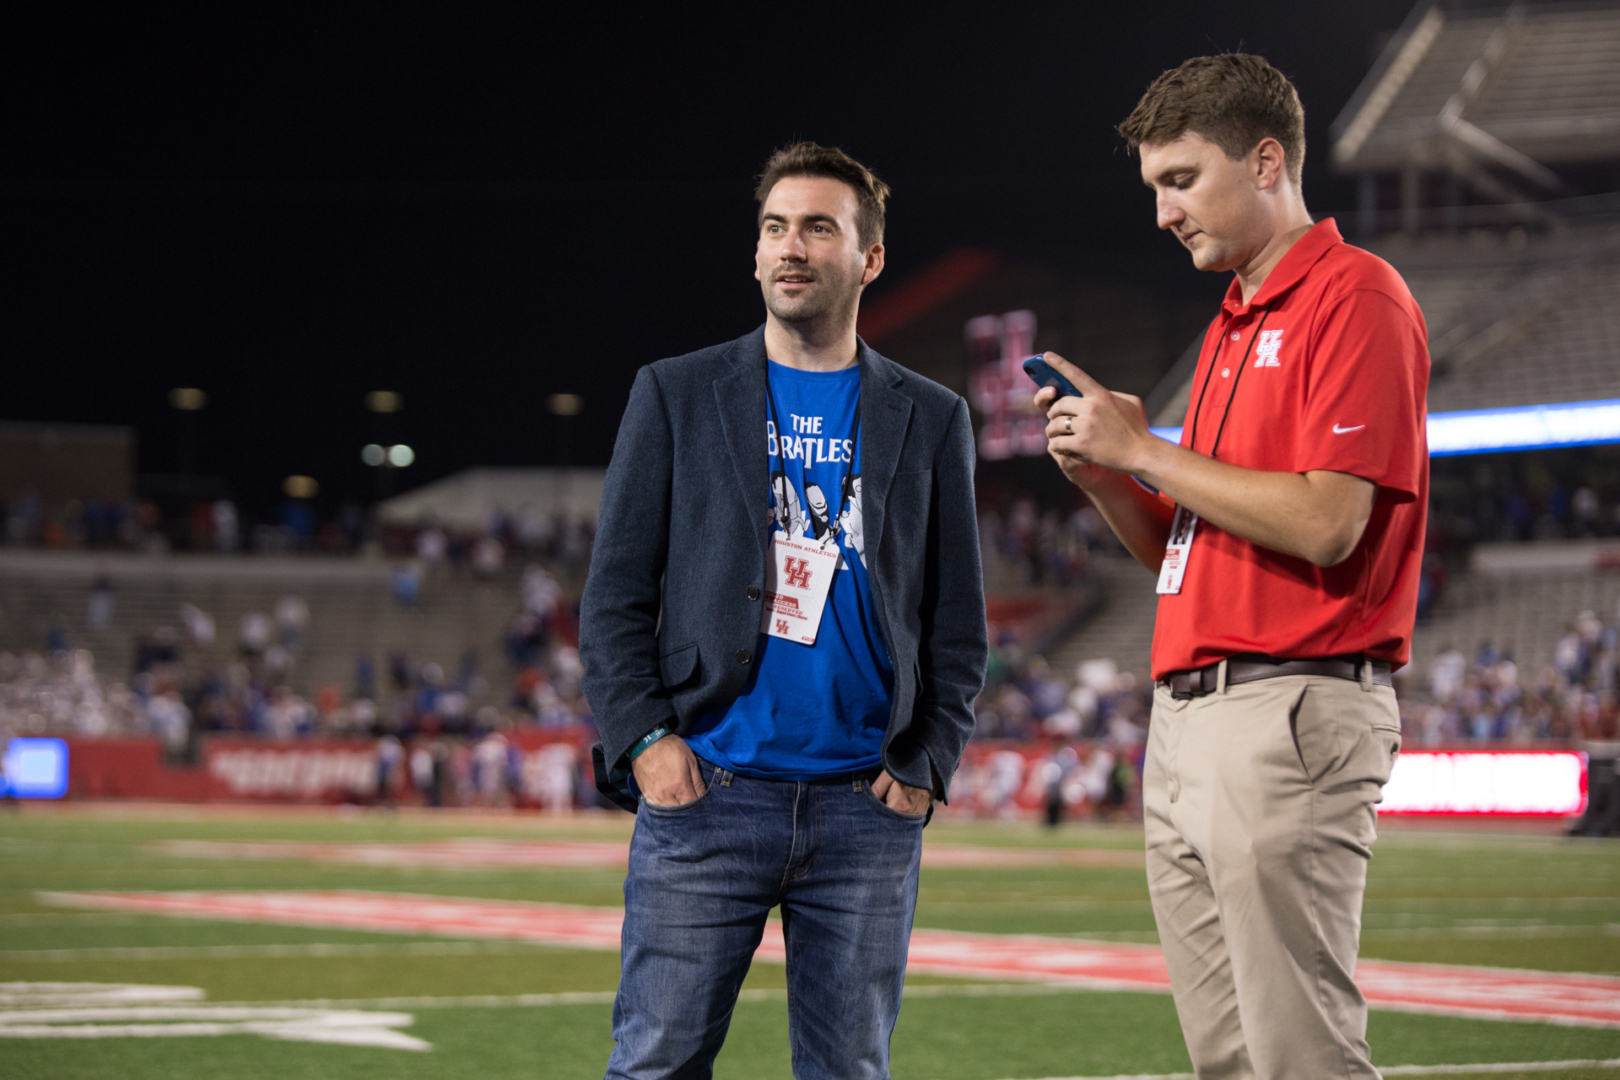 Joey Mellows (left), better known as Baseball Brit by his followers, attended his first college football game at TDECU Stadium after spending the bulk of the year traveling the United States watching professional baseball. | Trevor Nolley/The Cougar